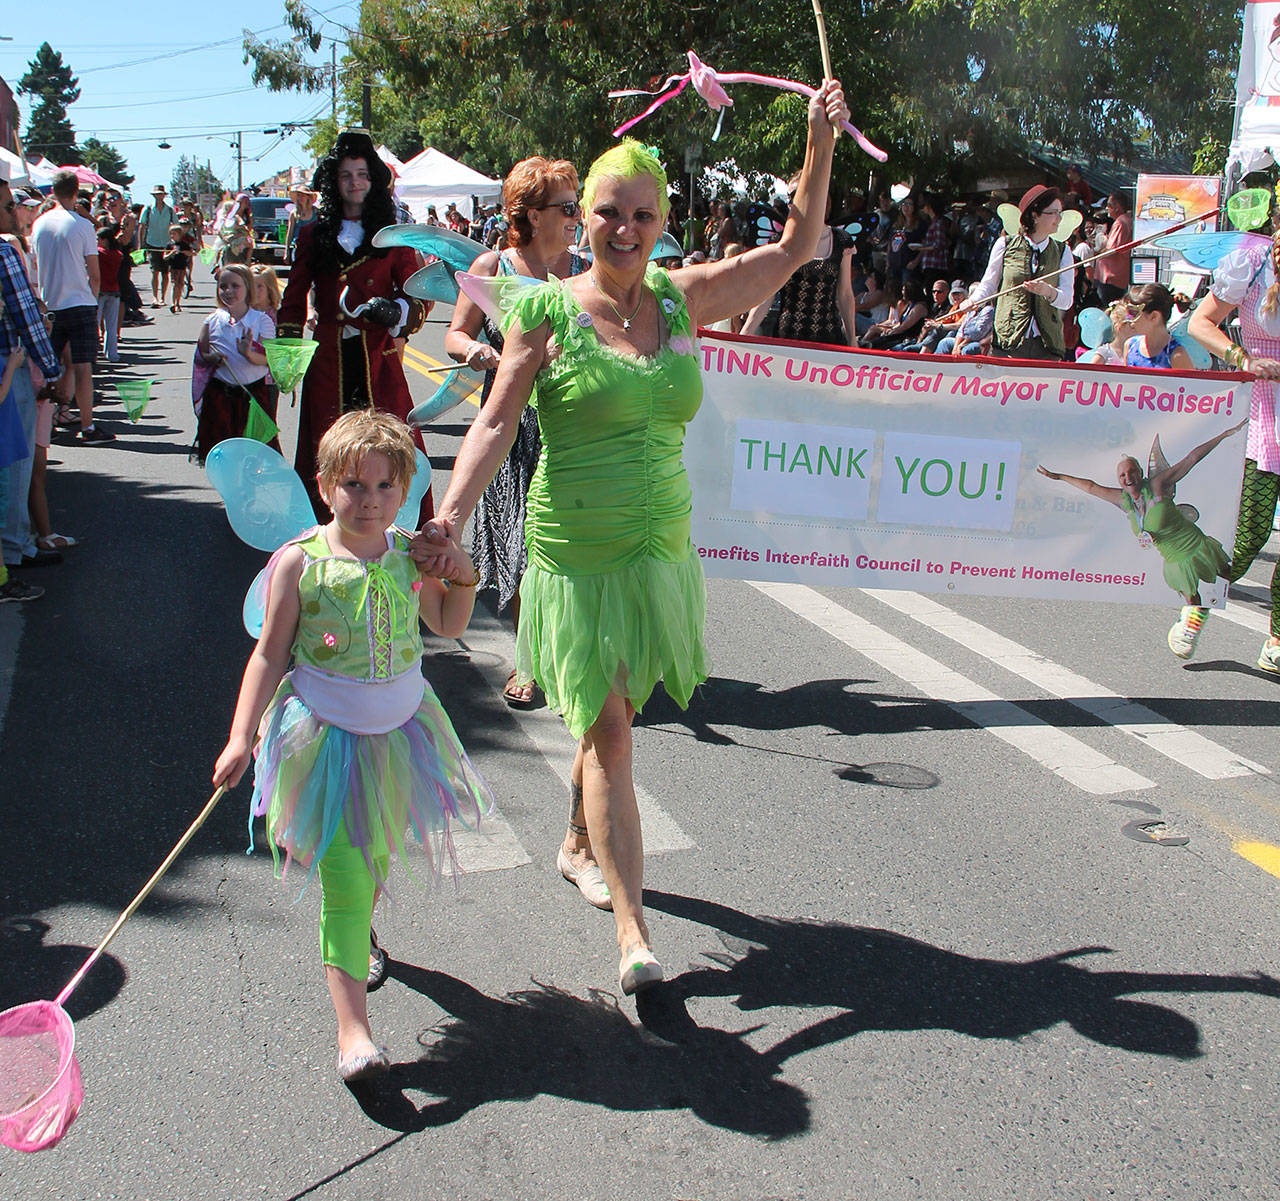 Tink walks in the parade with her young friend Millie. (Susan Riemer/Staff Photo)